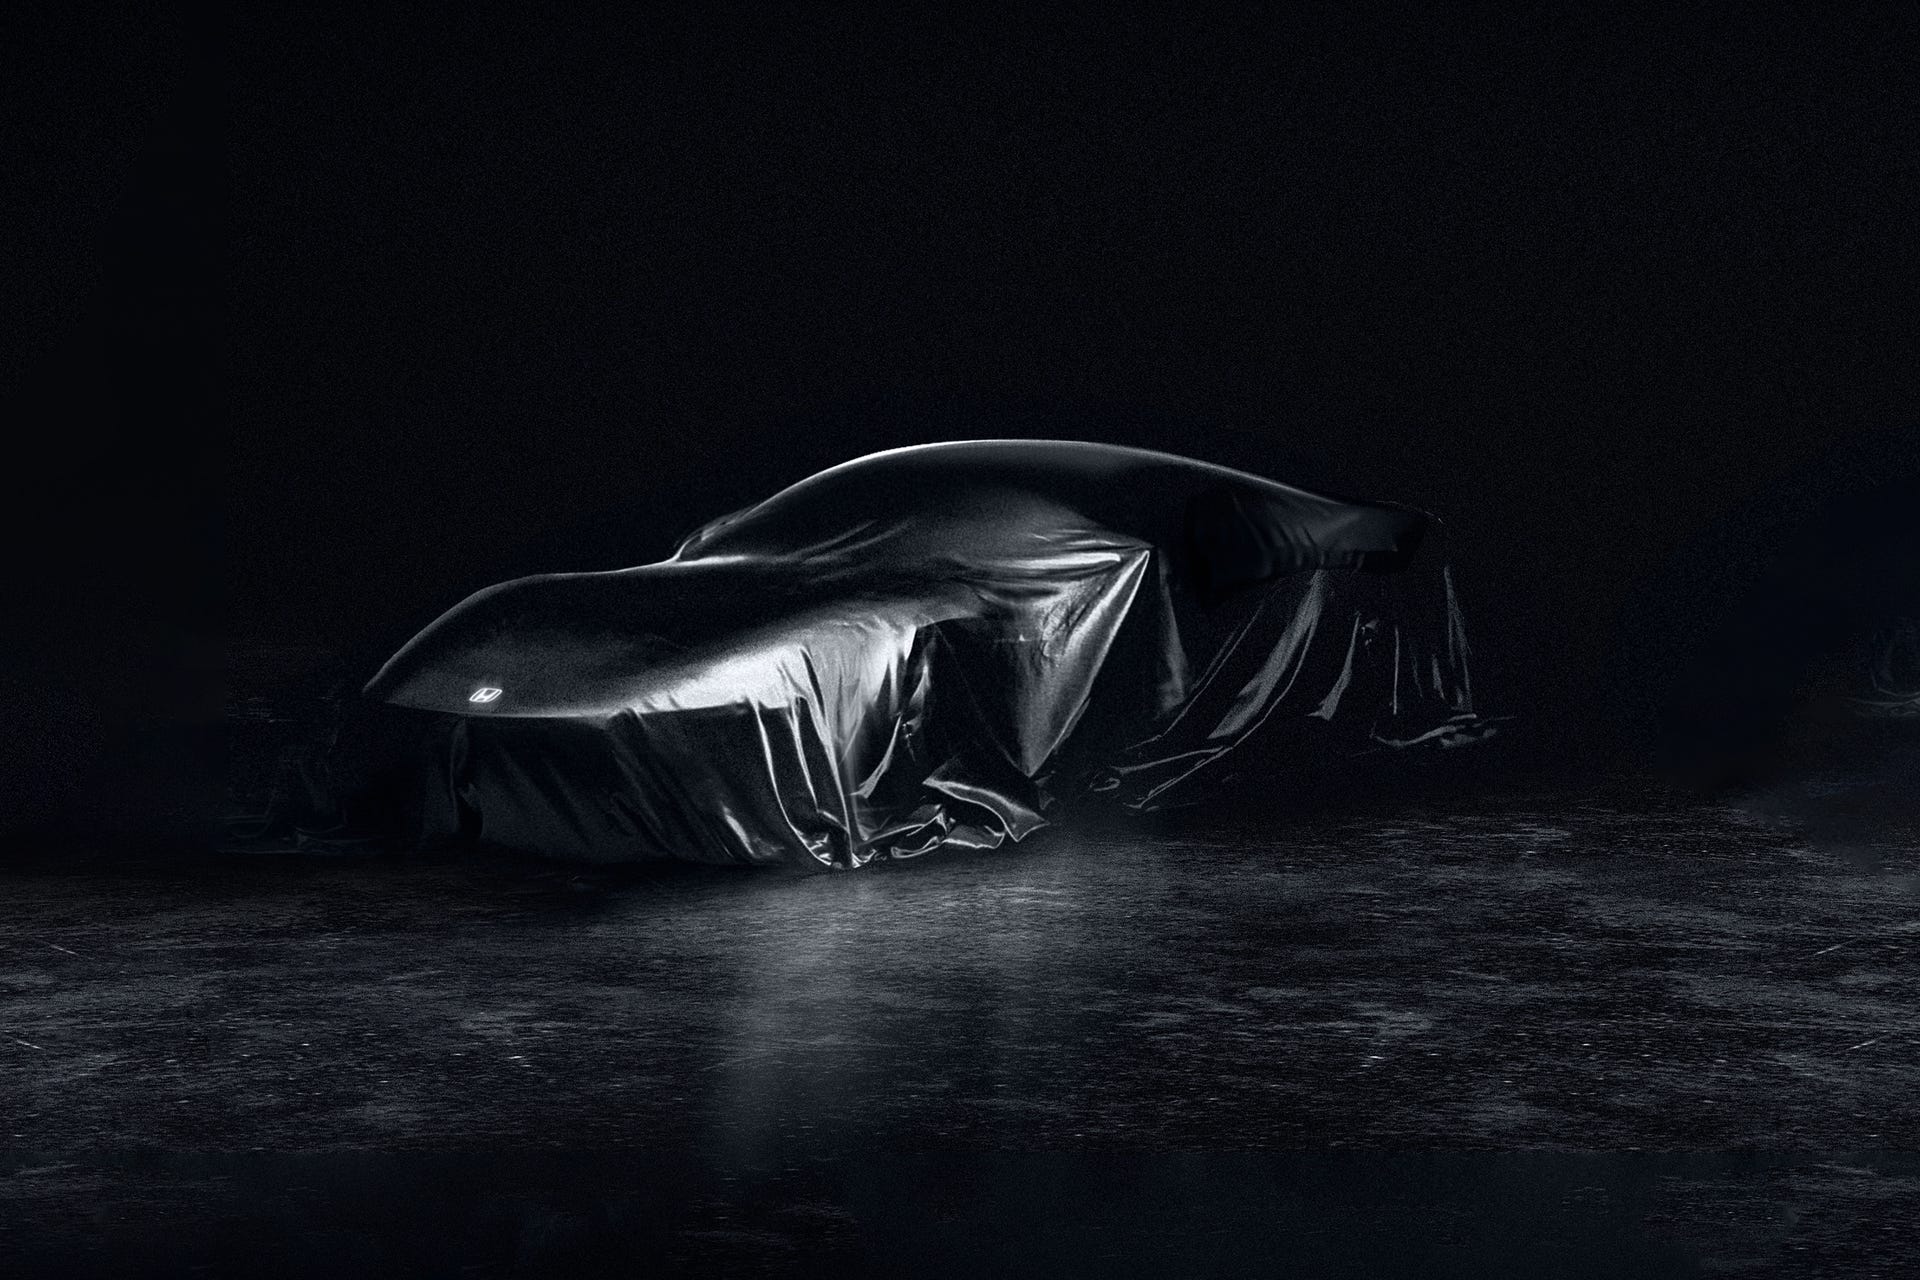 A black sports car from the side, against a dark background.